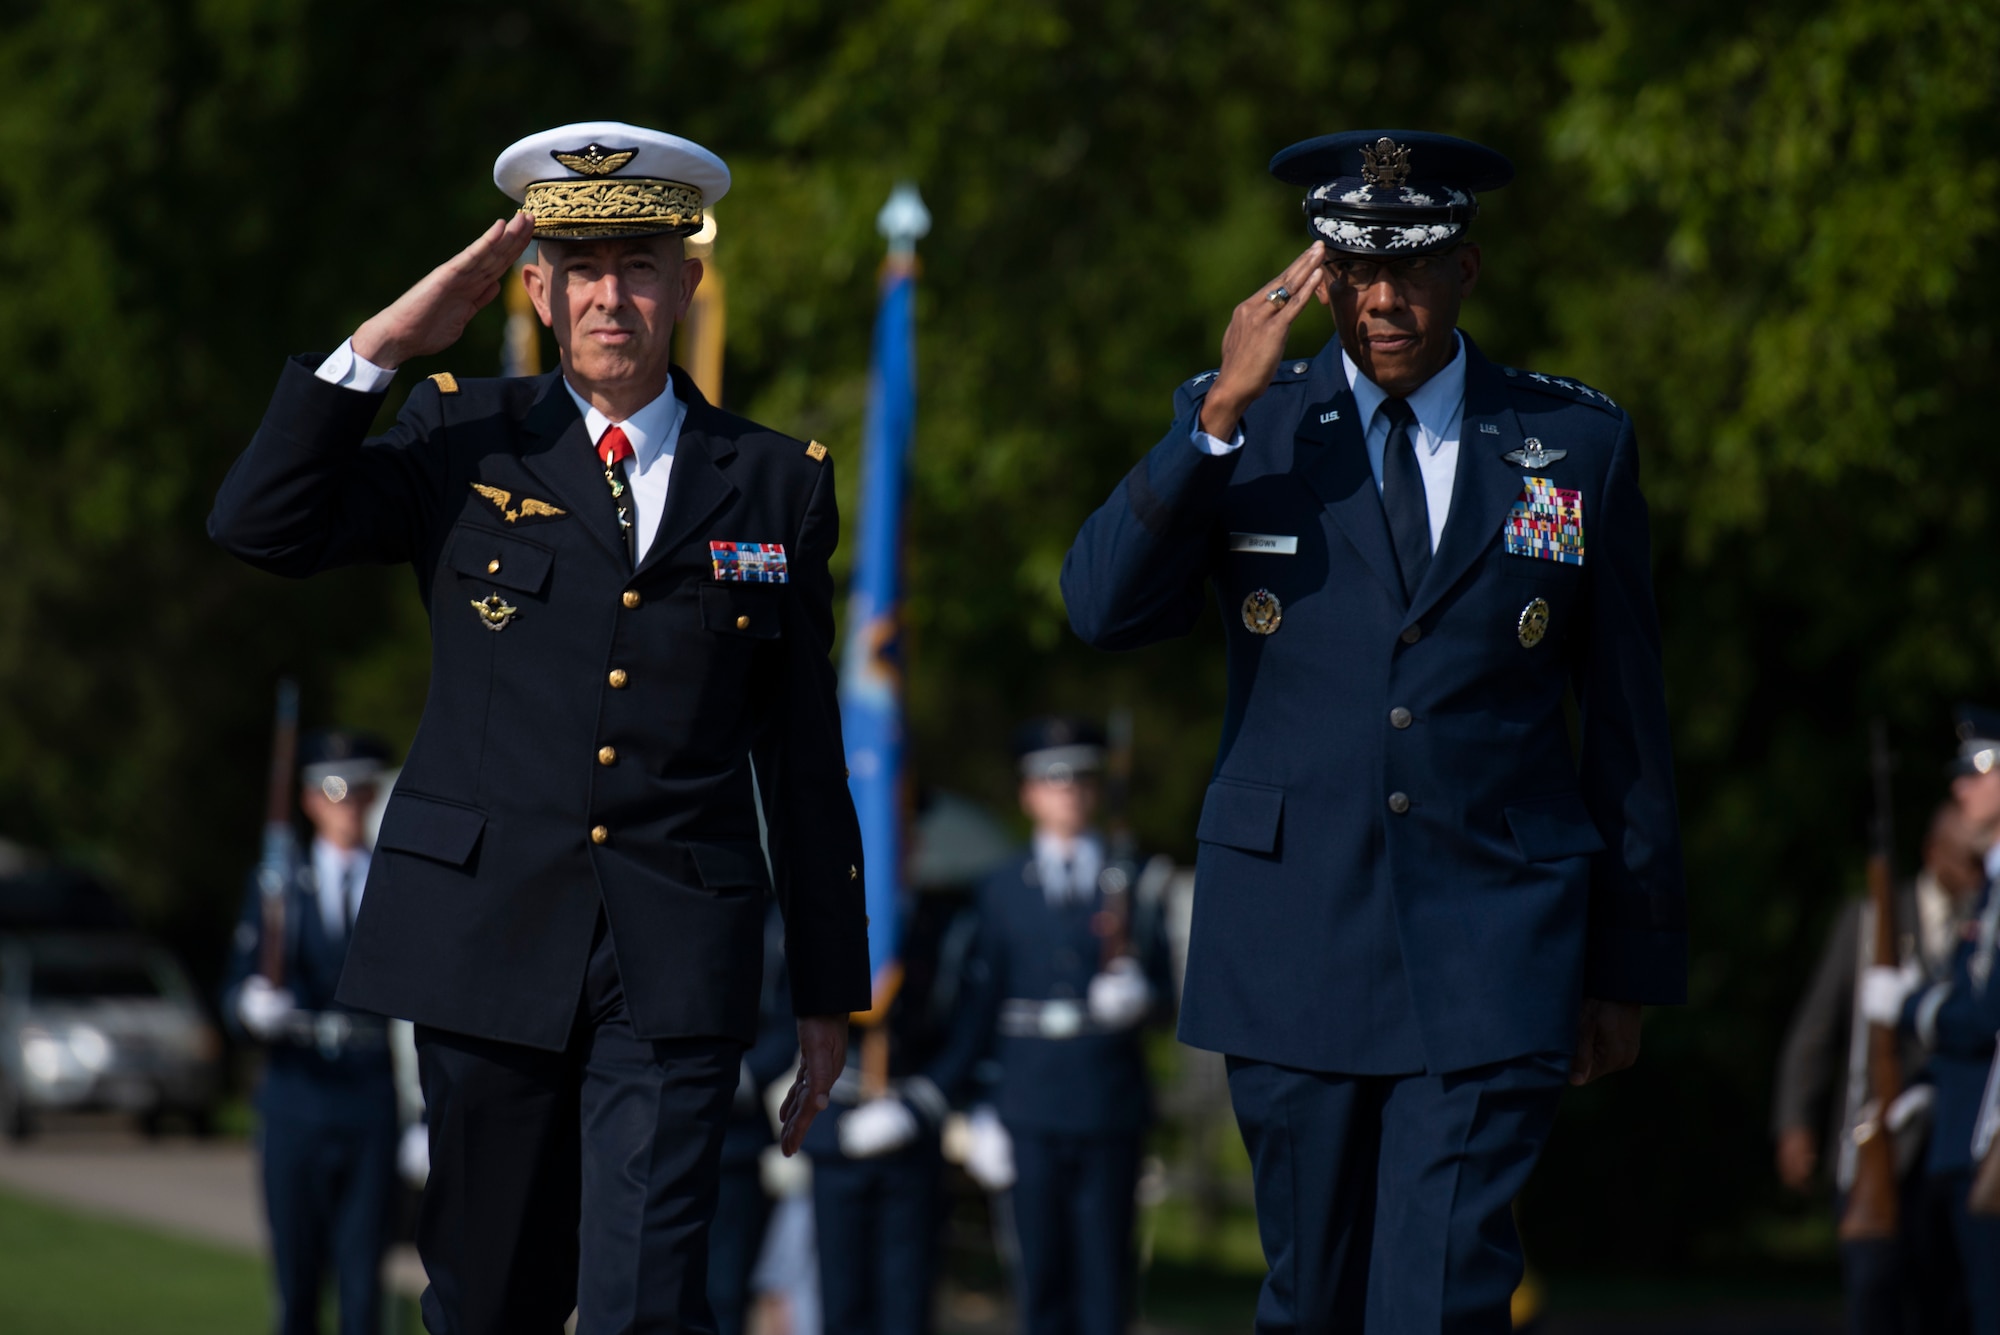 French Air and Space Force Chief of Staff General Philippe Lavigne and U.S. Air Force Chief of Staff Gen. CQ Brown, Jr. walk through the honor guard corridor